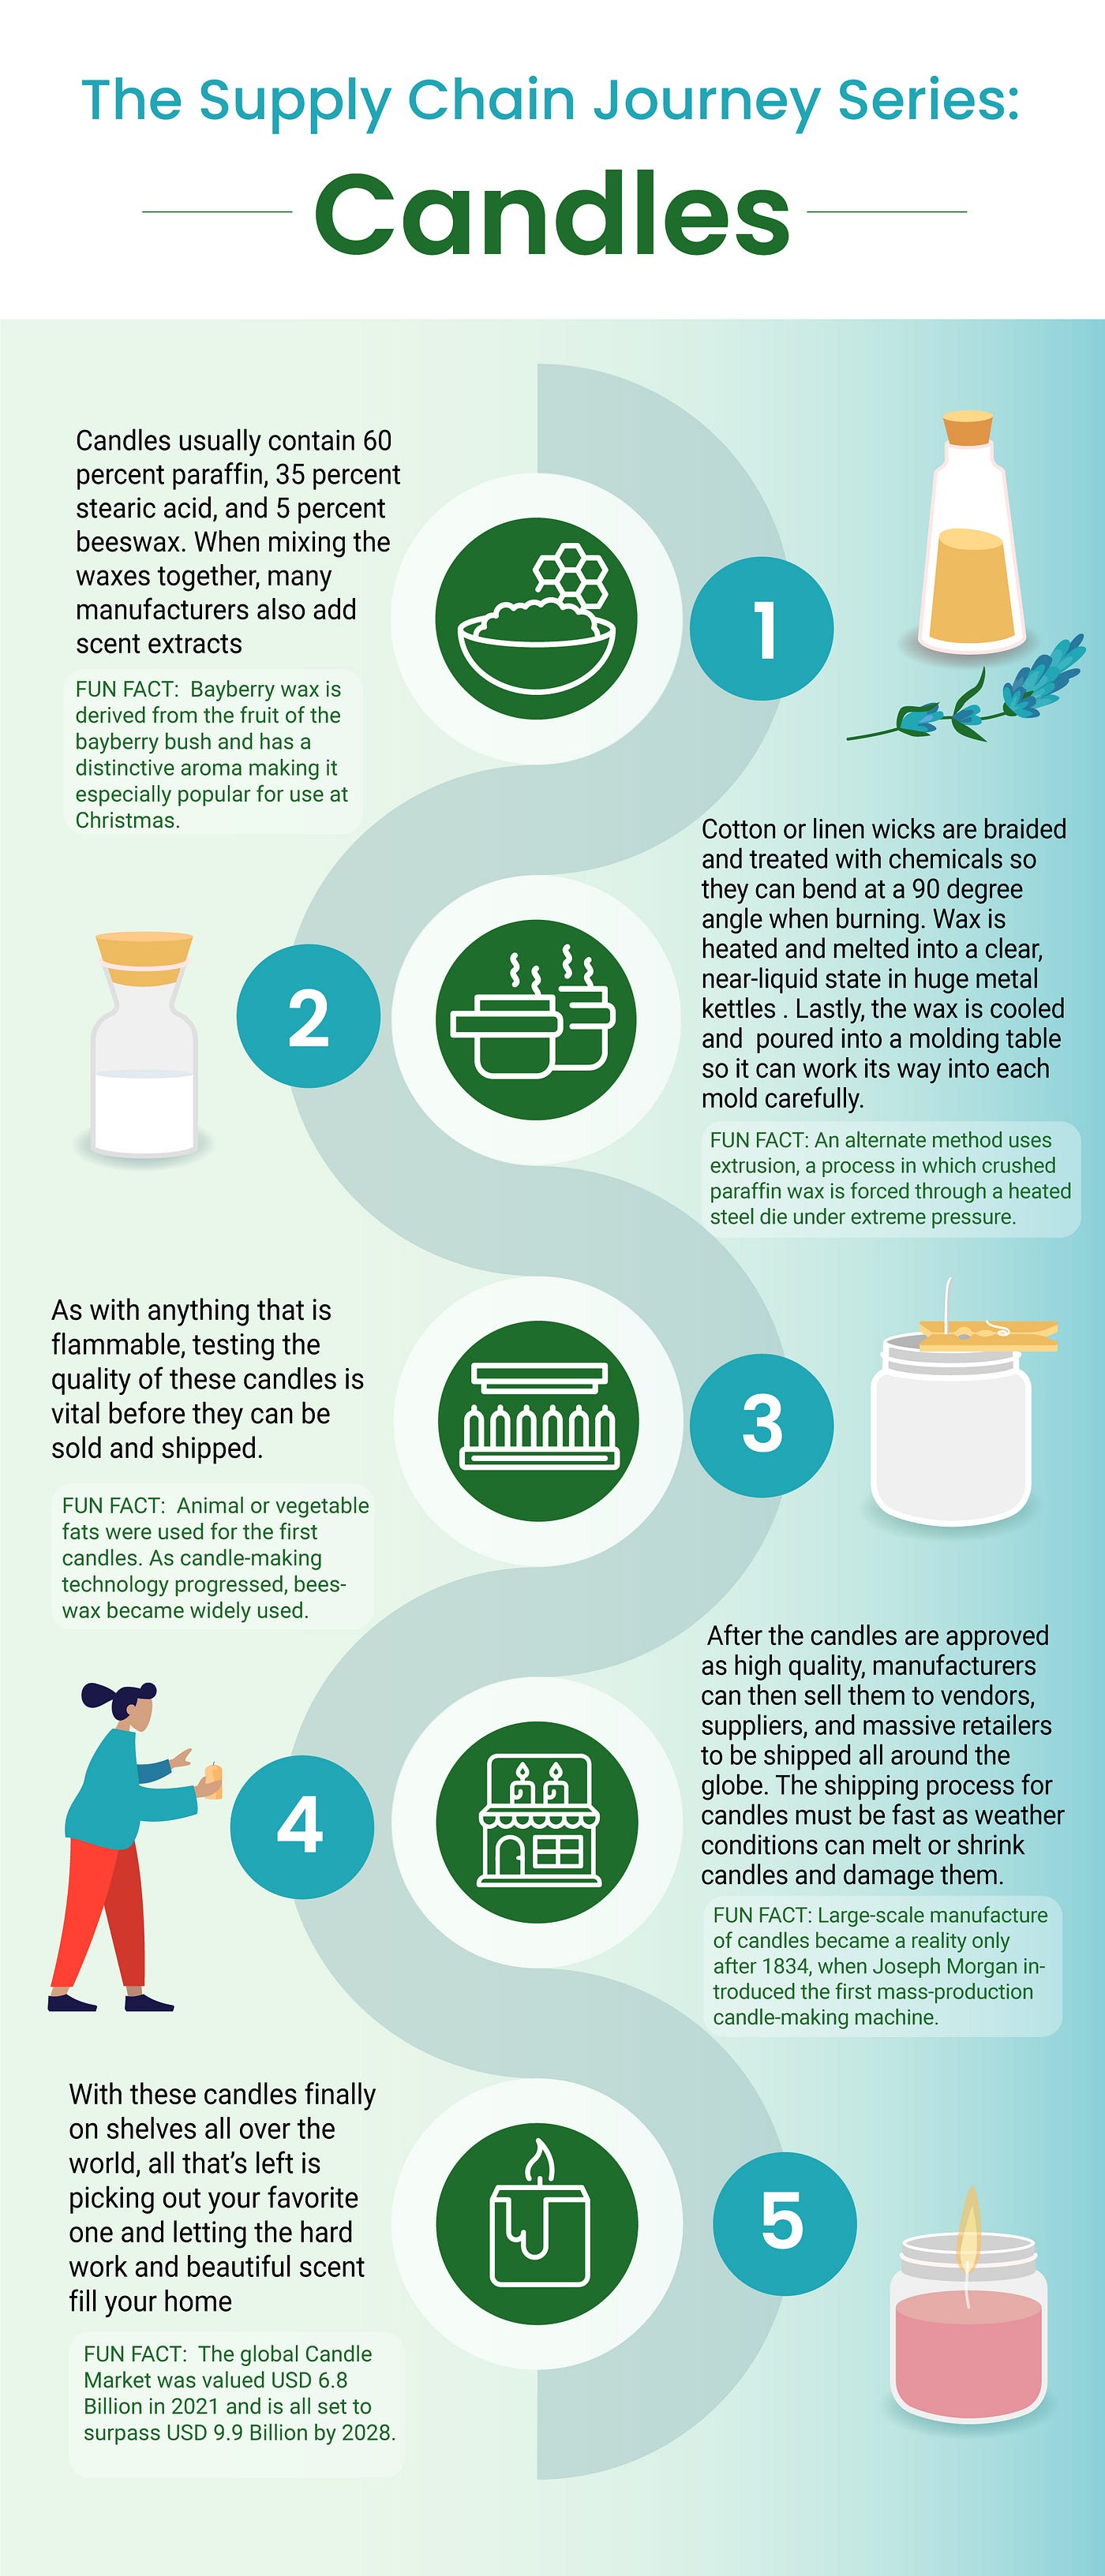 Sweet Smell of Success: The Supply Chain Journey of Candles, by Stimulus,  Inc.